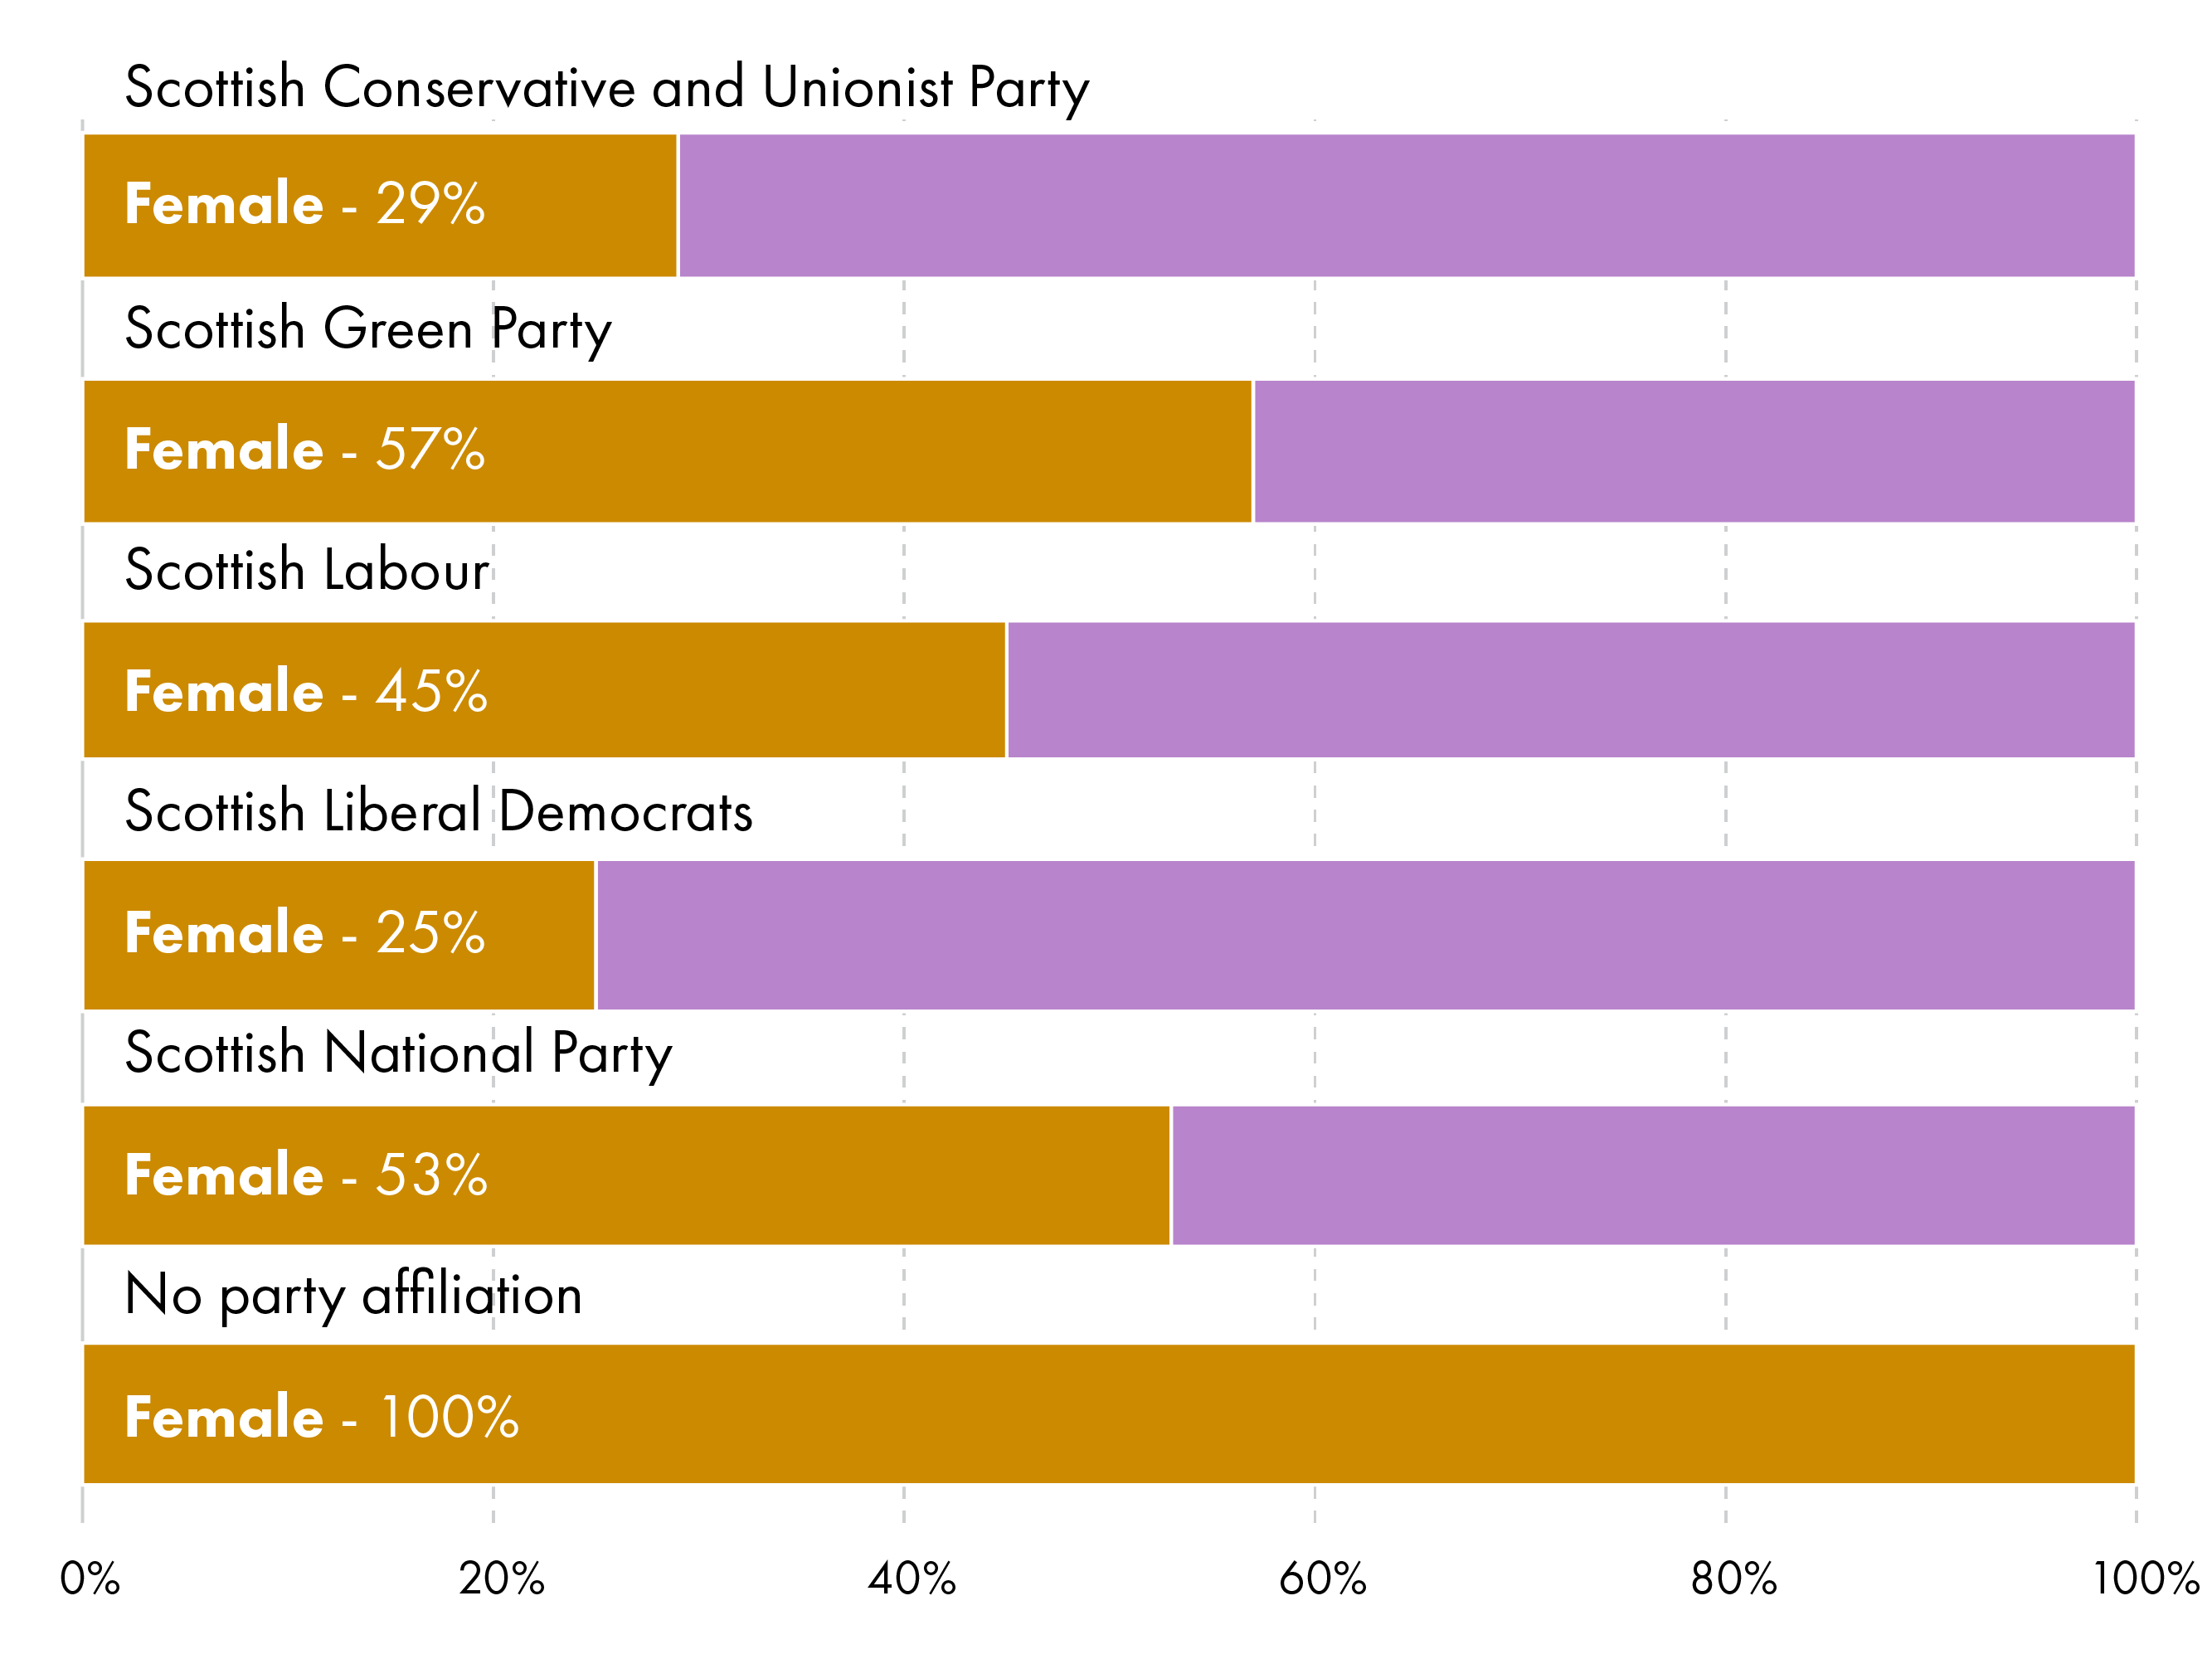 Scottish Conservative and Unionist Party - Female - 29%, Scottish Green Party - Female - 57%, Scottish Labour - Female - 45%, Scottish Liberal Democrats - Female - 25%, Scottish National Party - Female - 53%, No party  affiliation - Female - 100%